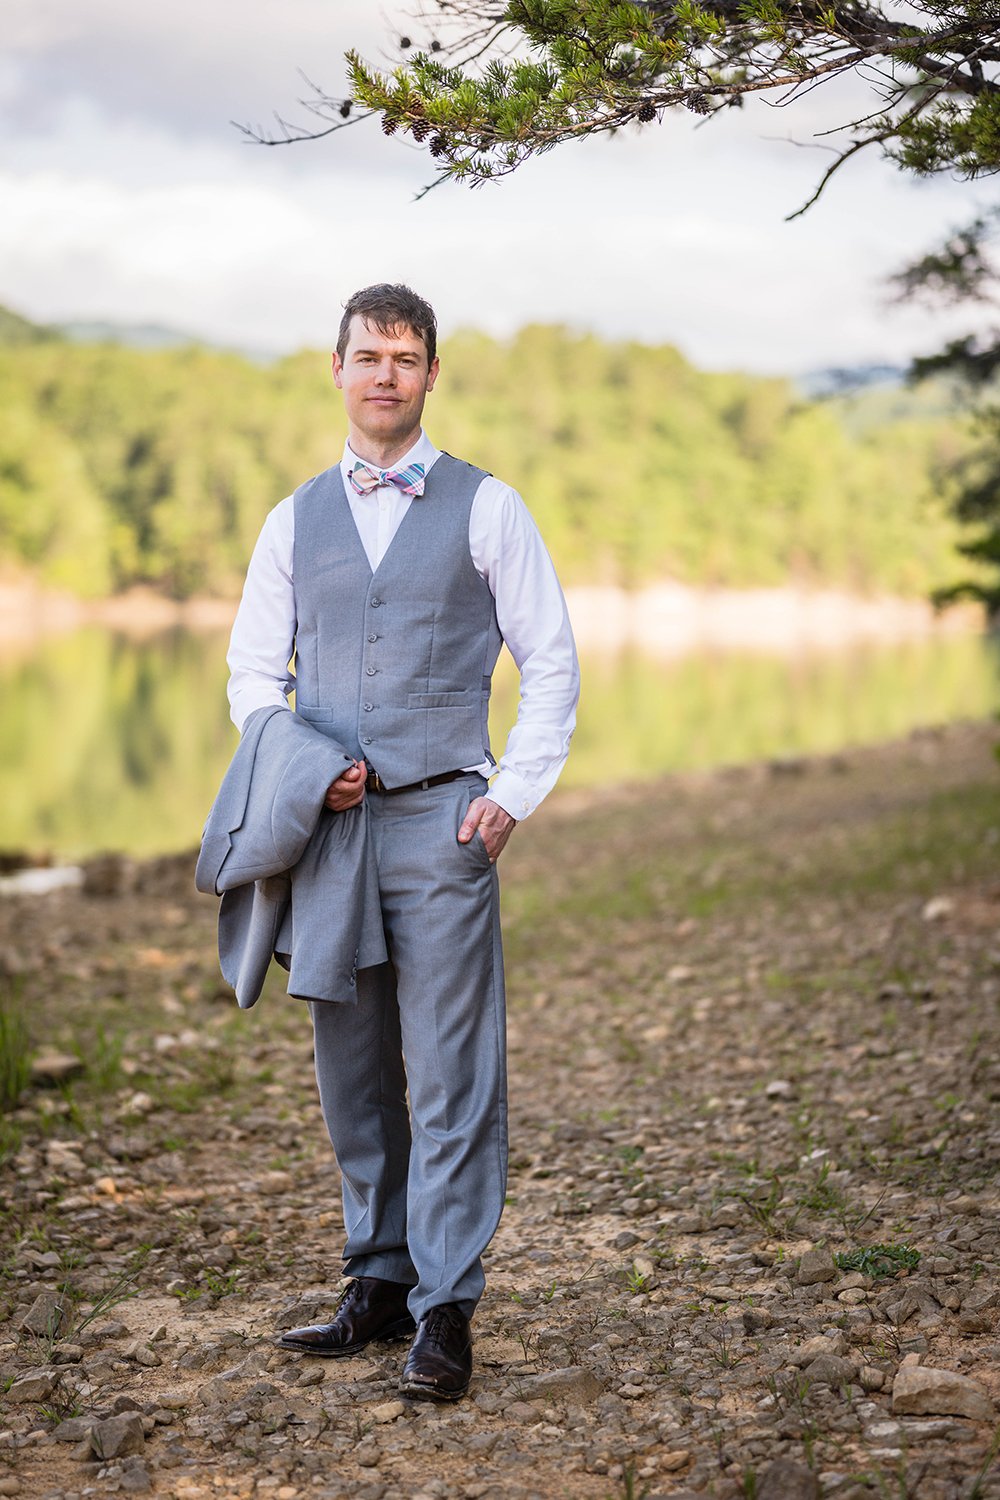 A man on his elopement day stands holding his suit jacket and looks at the camera for a photo.